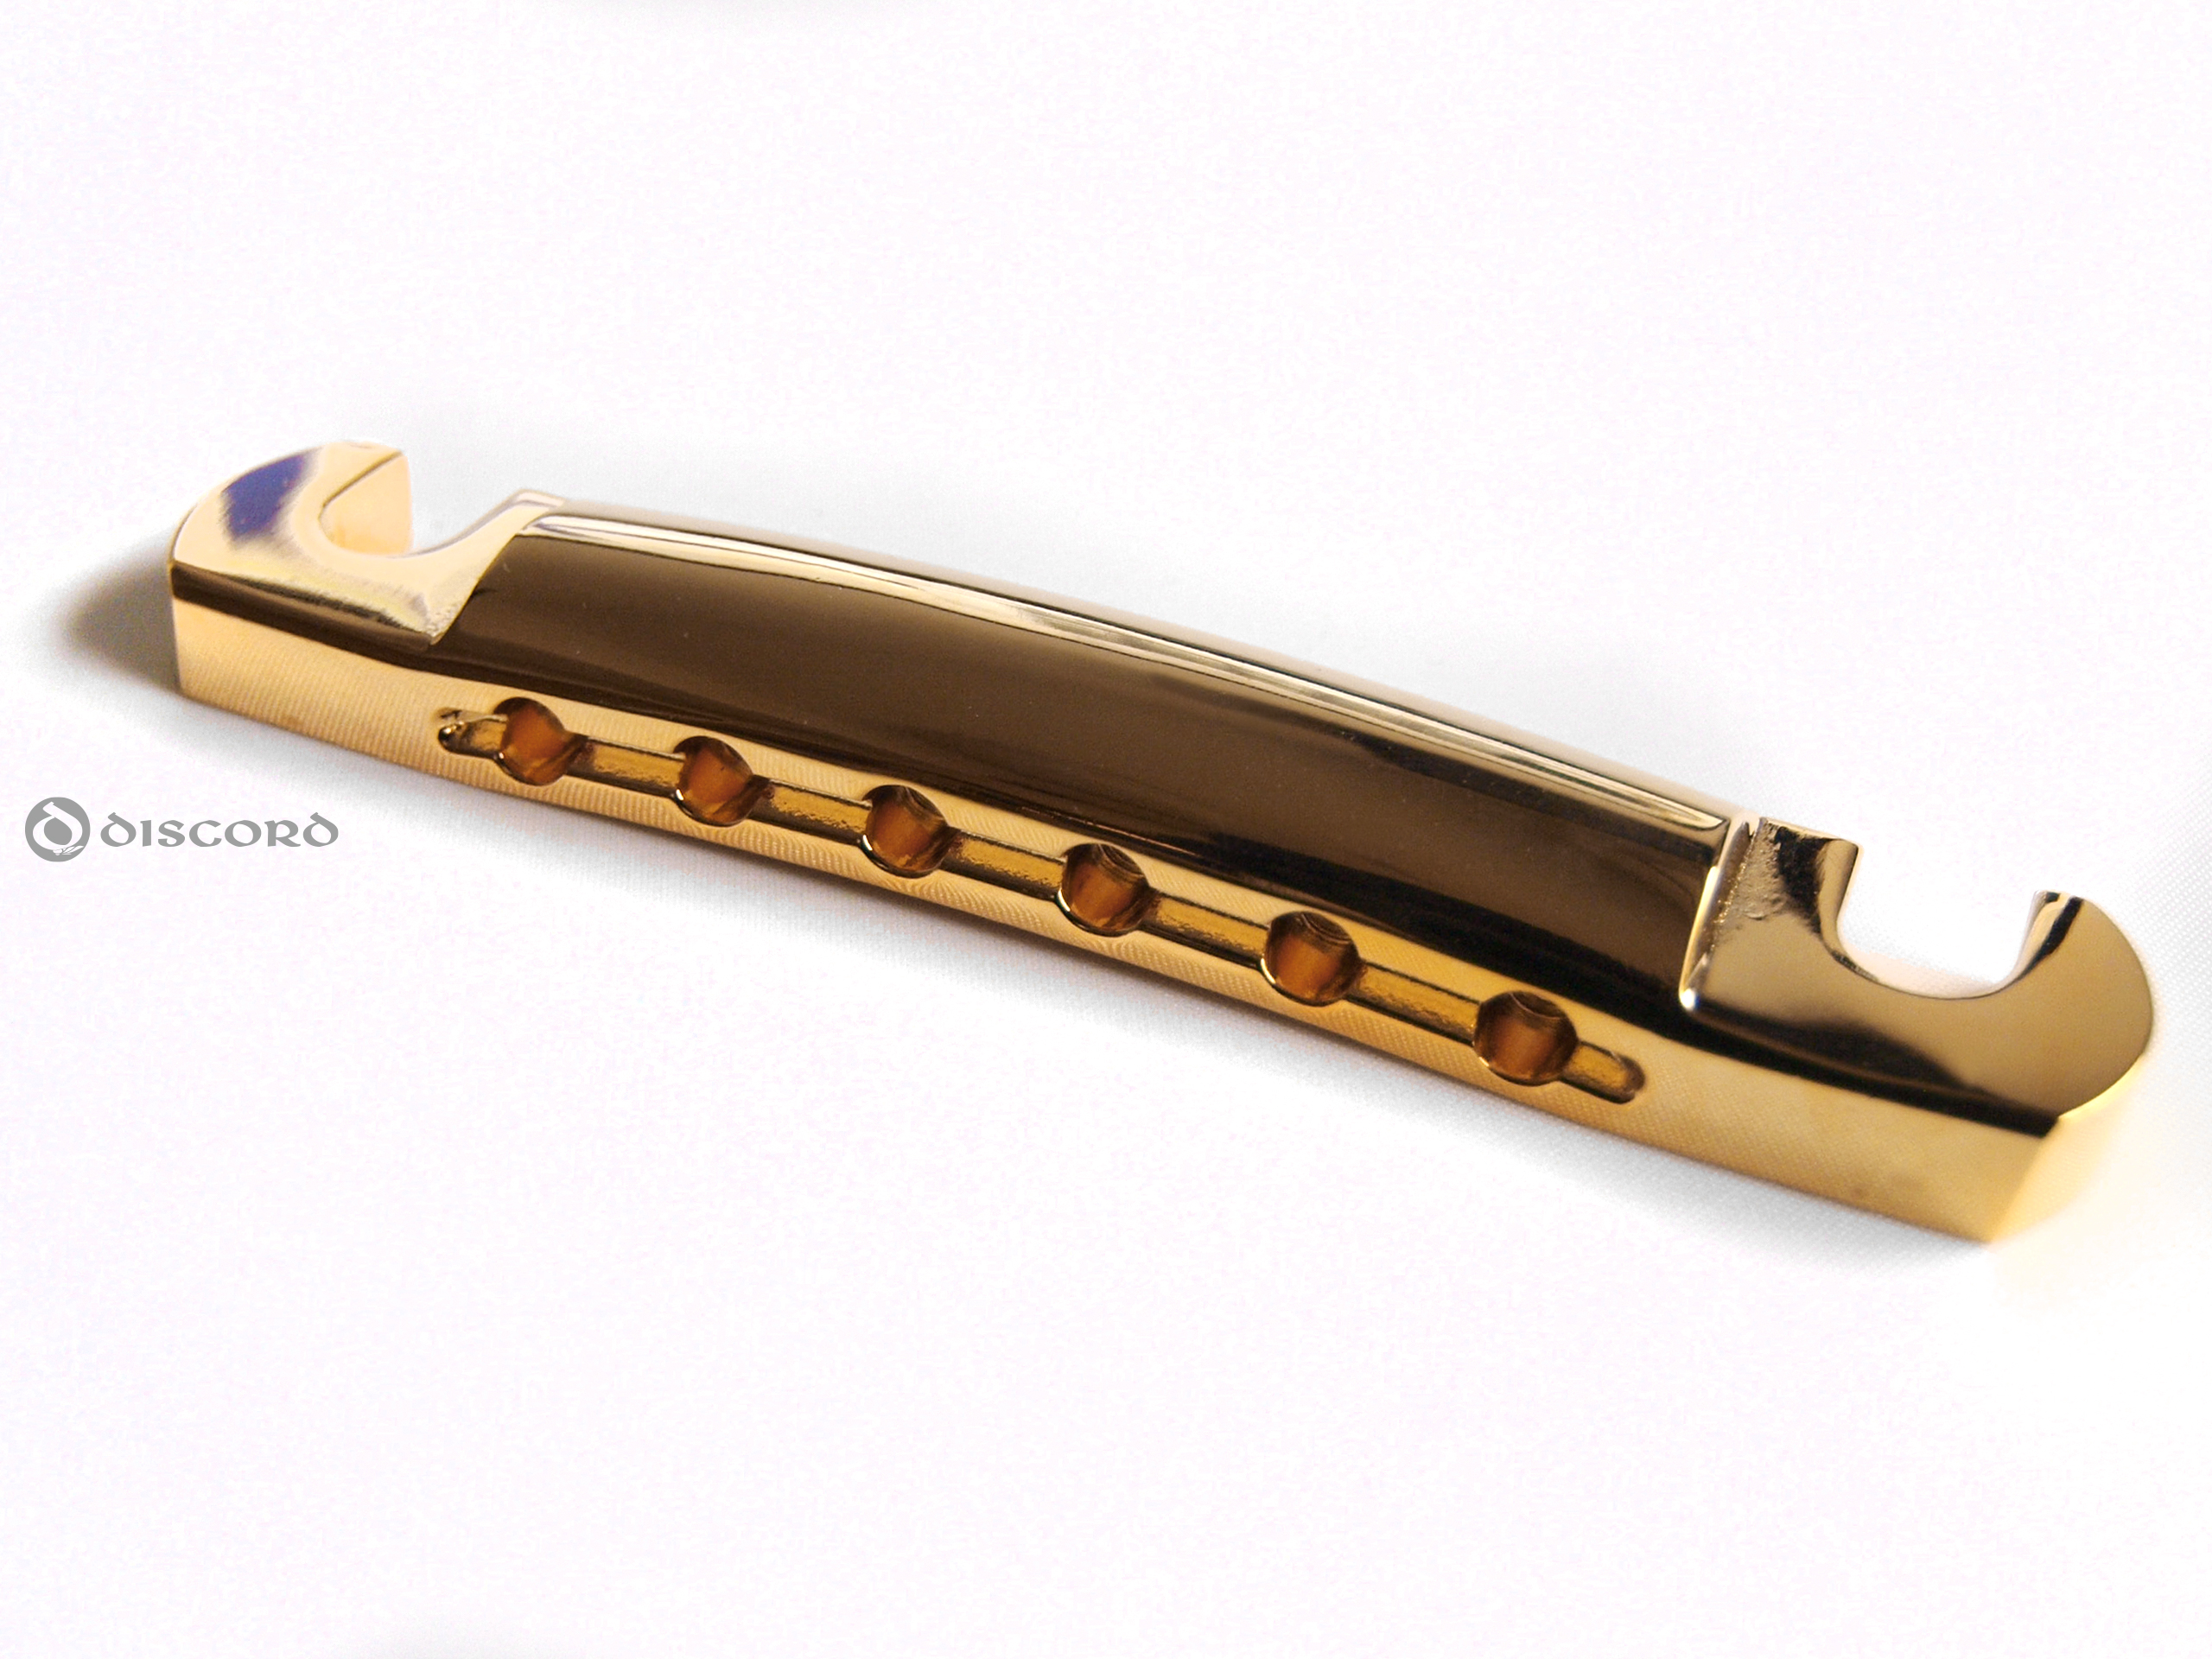 DISCORD 60's STYLE ALUMINIUM TAILPIECE GOLD Manufacturers specification details 